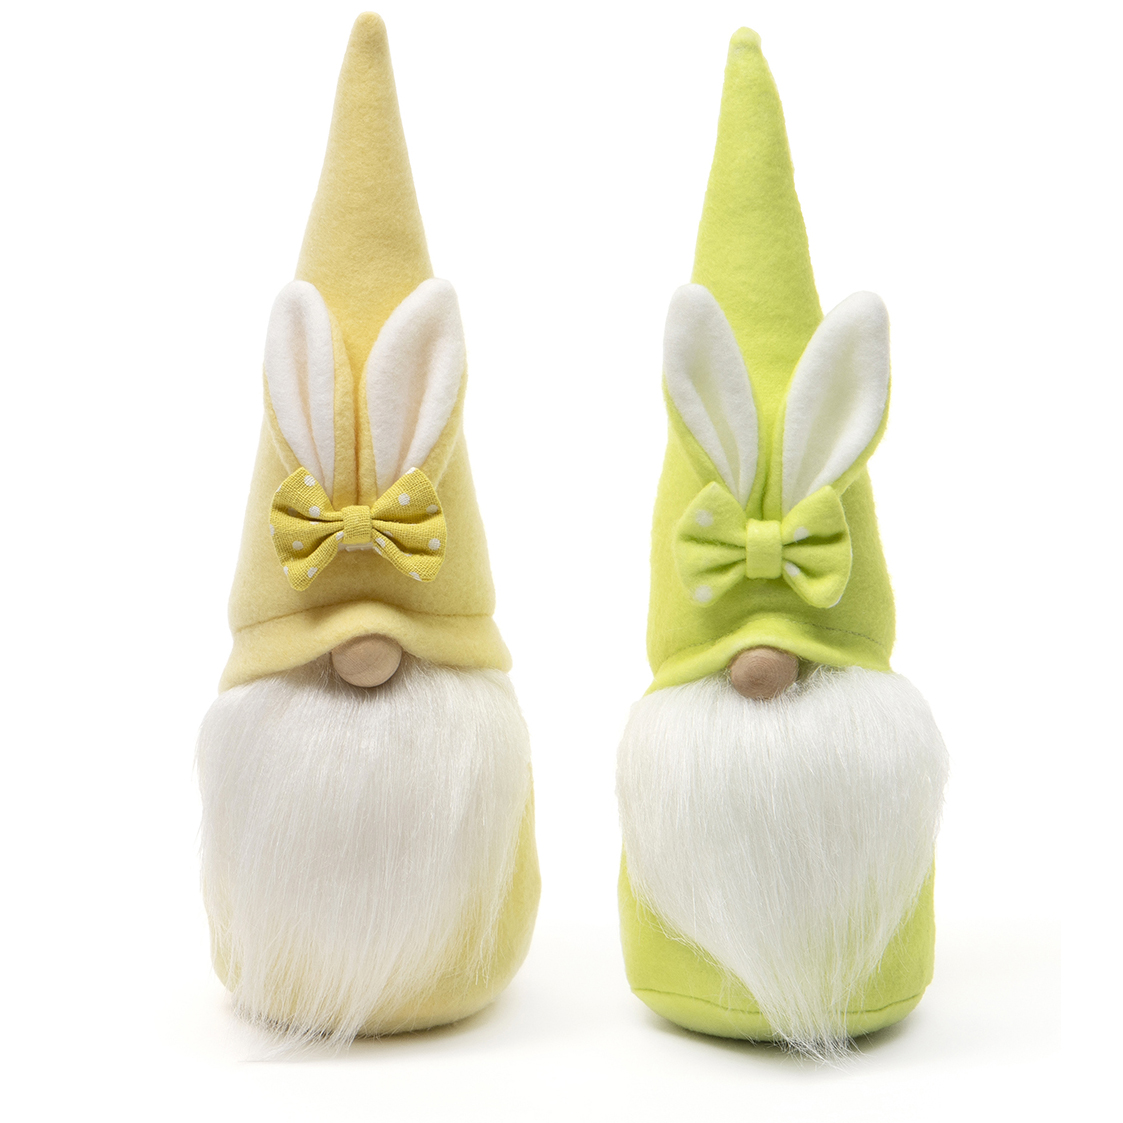 Gnome with Bow/Bunny Ears, Wood Nose Set of 2